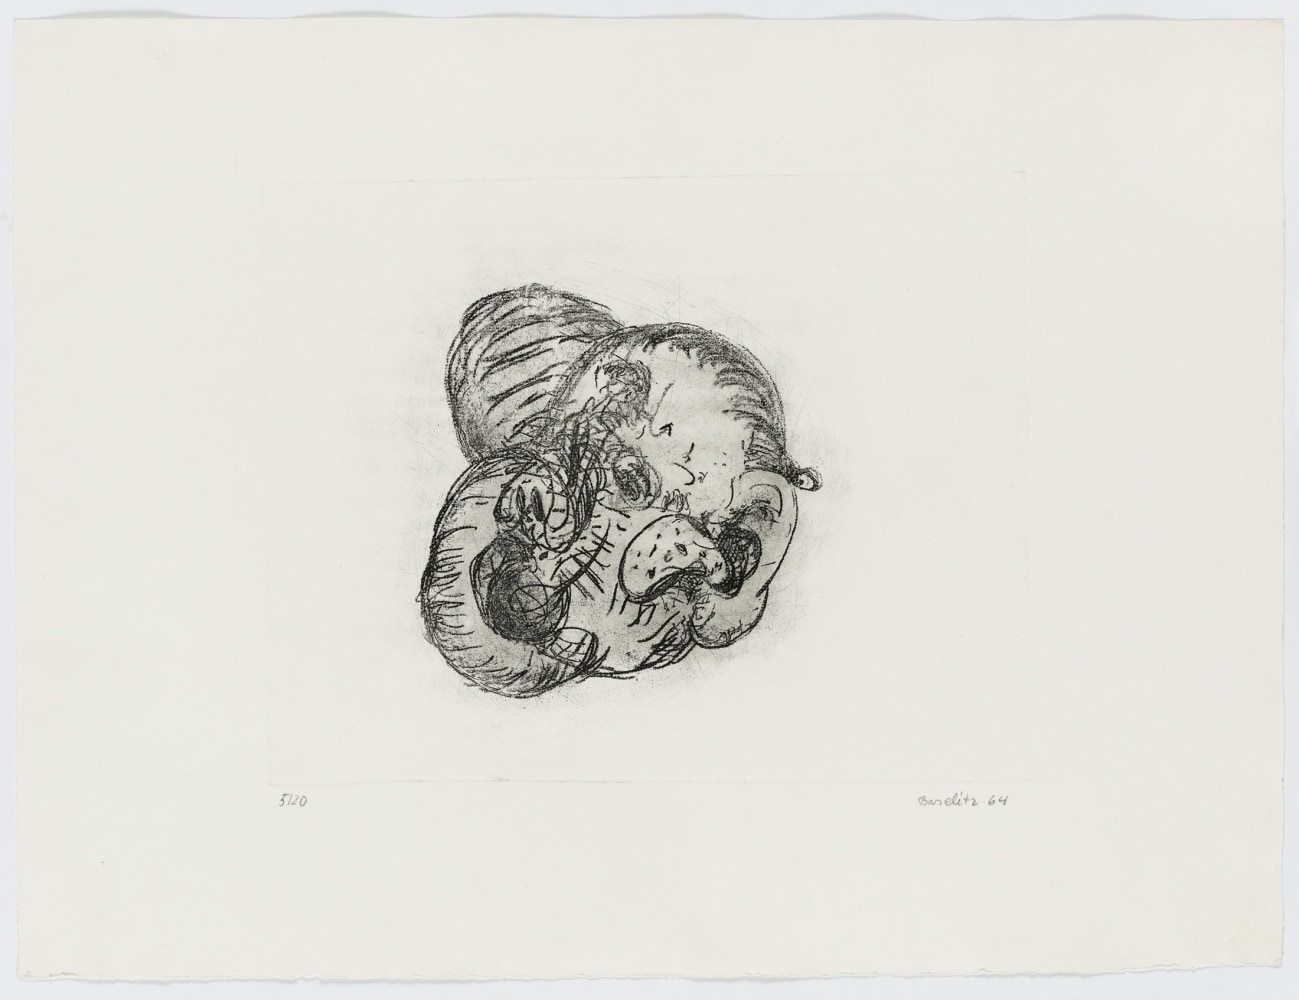 Georg Baselitz
Ohr [Ear], 1964
Signed/Dated: 5/20; Baselitz 64
Etching and soft-ground etching on zinc plate; on copper printing paper
Image size: 9 5/8 x 12 1/4 inches (24.4 x 31.1 cm)
Paper size: 15 1/2 x 20 3/8 inches (39.4 x 51.8 cm)
Framed dimensions: 18 7/8 x 24 3/4 inches (47.9 x 62.9 cm)
&amp;copy; Georg Baselitz 2021
Photo: &amp;copy;&amp;nbsp;bernhardstrauss.com